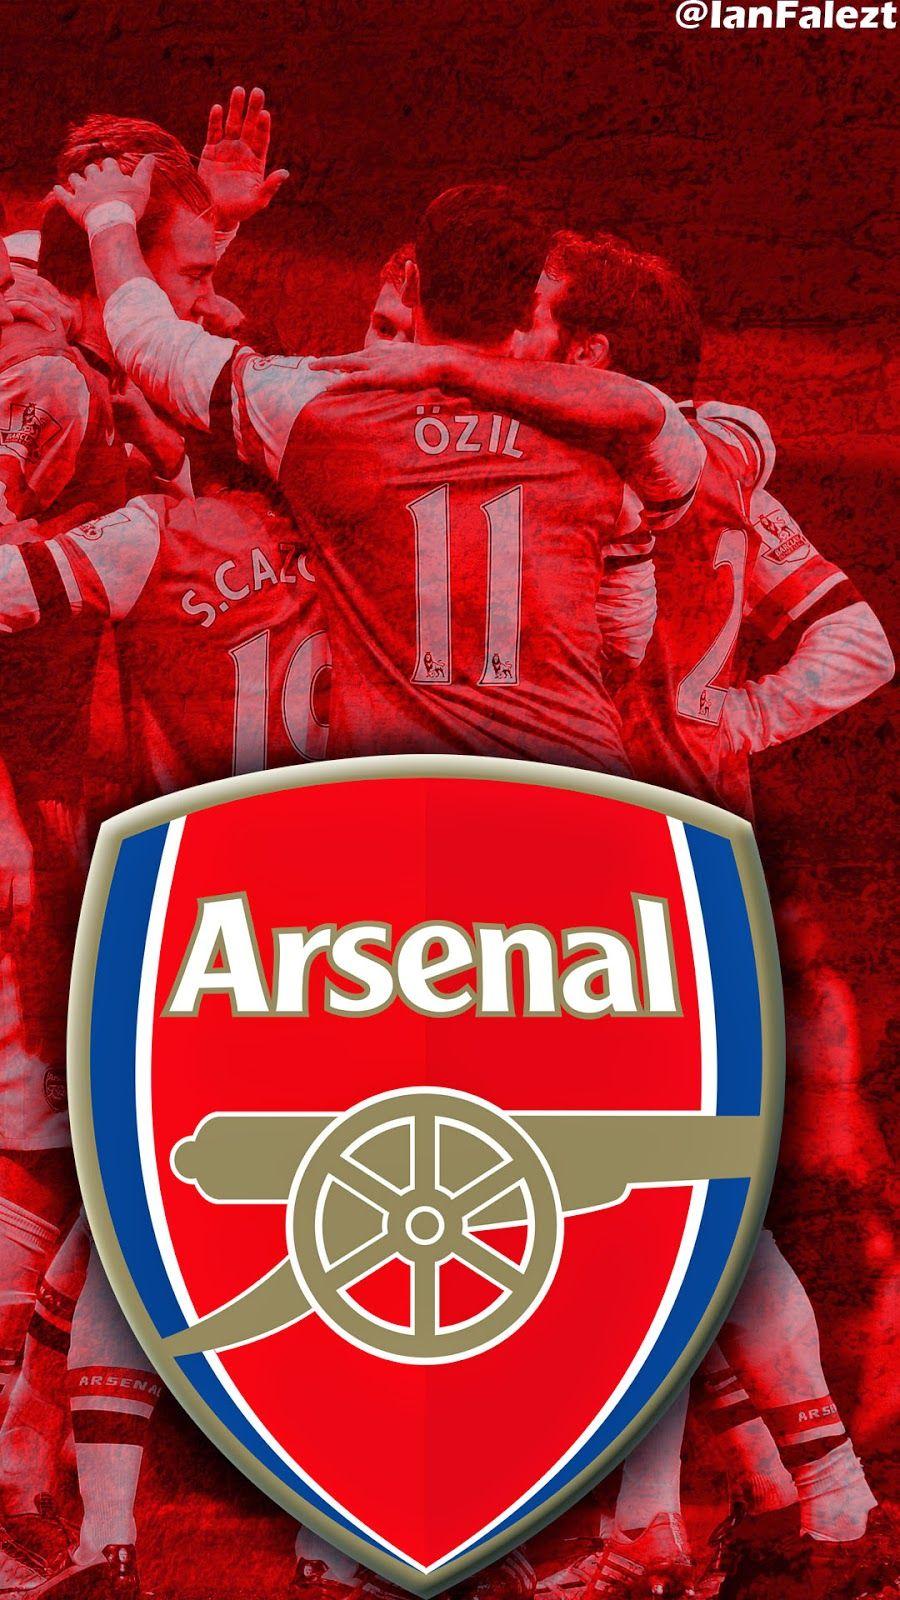 Arsenal Wallpaper HD For Samsung Galaxy S IV. Awesome Football